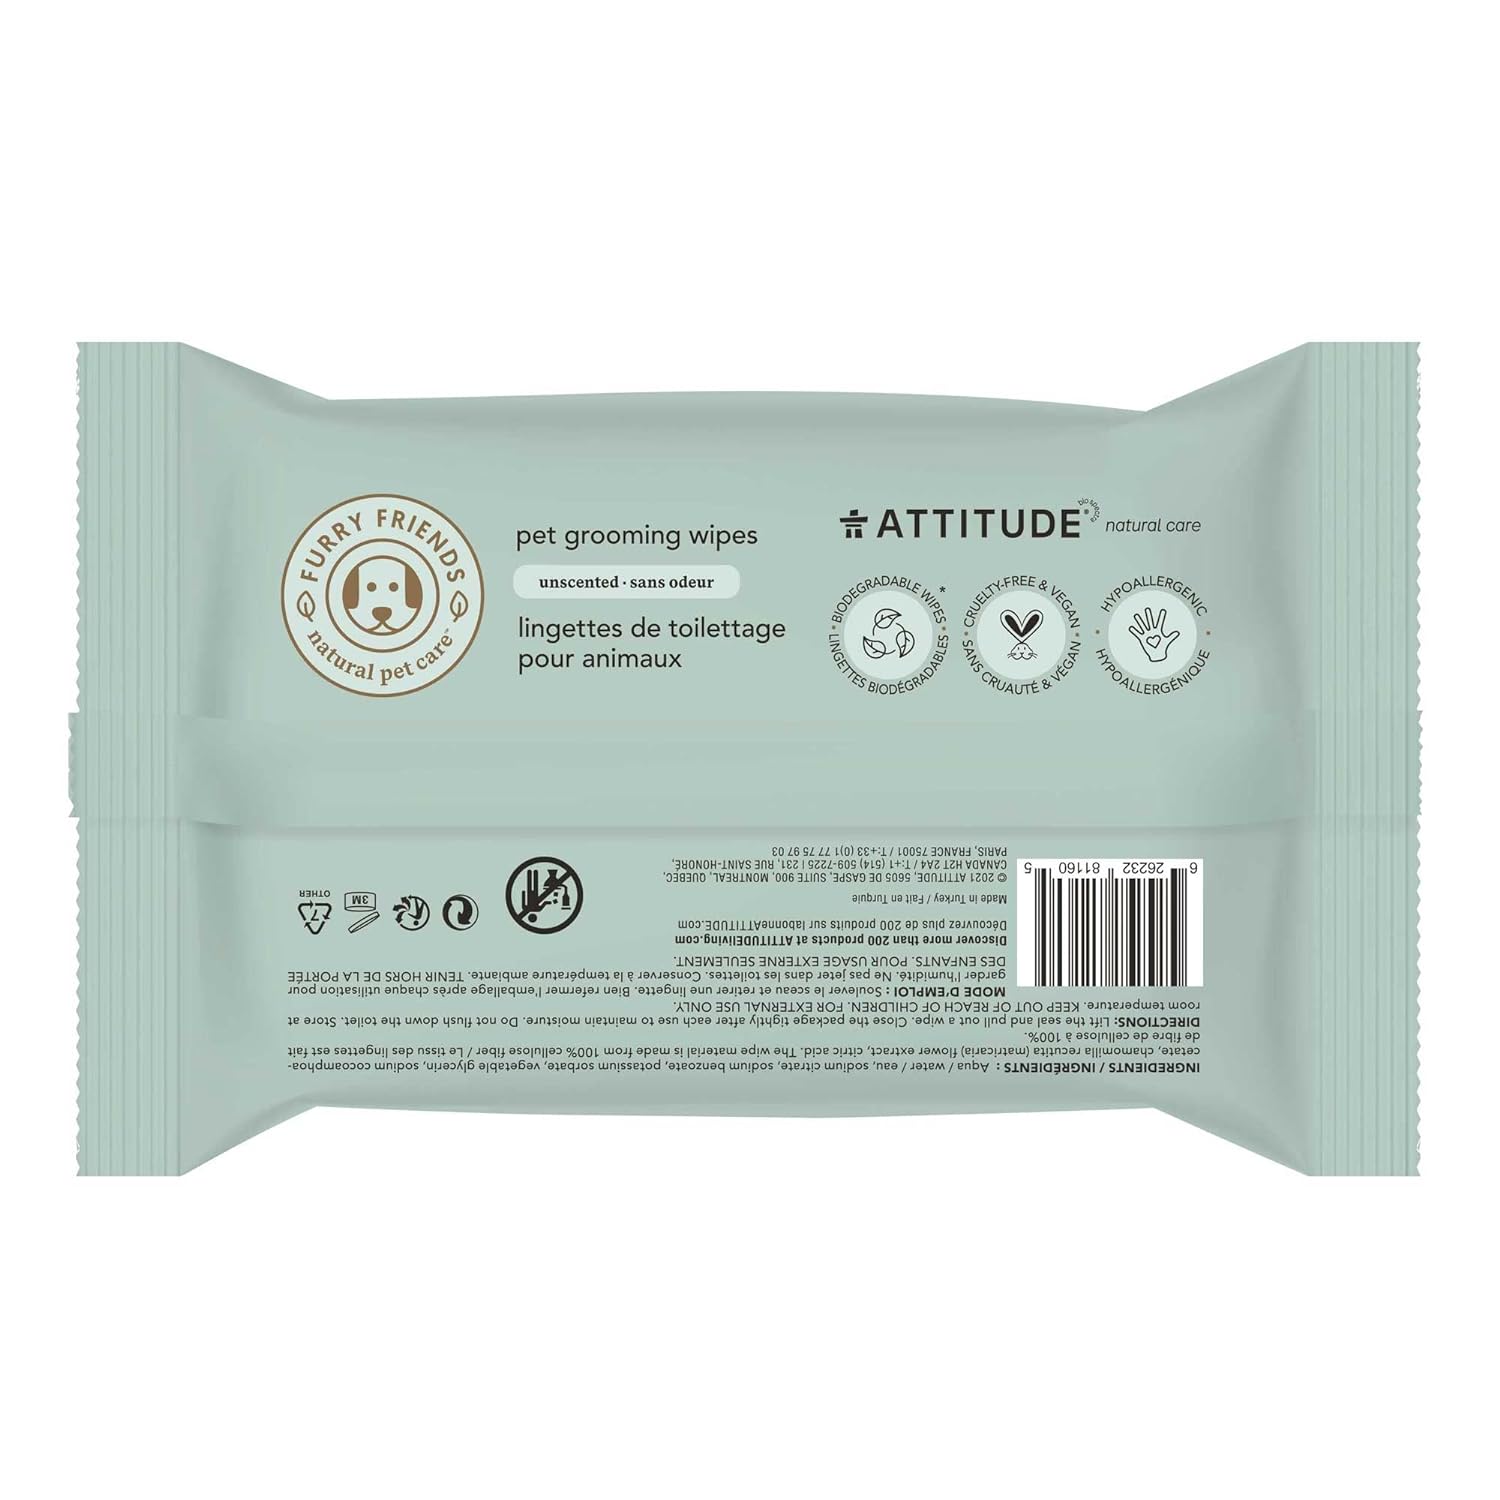 ATTITUDE Pet Grooming Wipes, Hypoallergenic Plant and Mineral-Based Ingredients, Vegan and Cruelty-Free Biodegradable Products, Unscented, 72 count (Pack of 6) : Pet Supplies